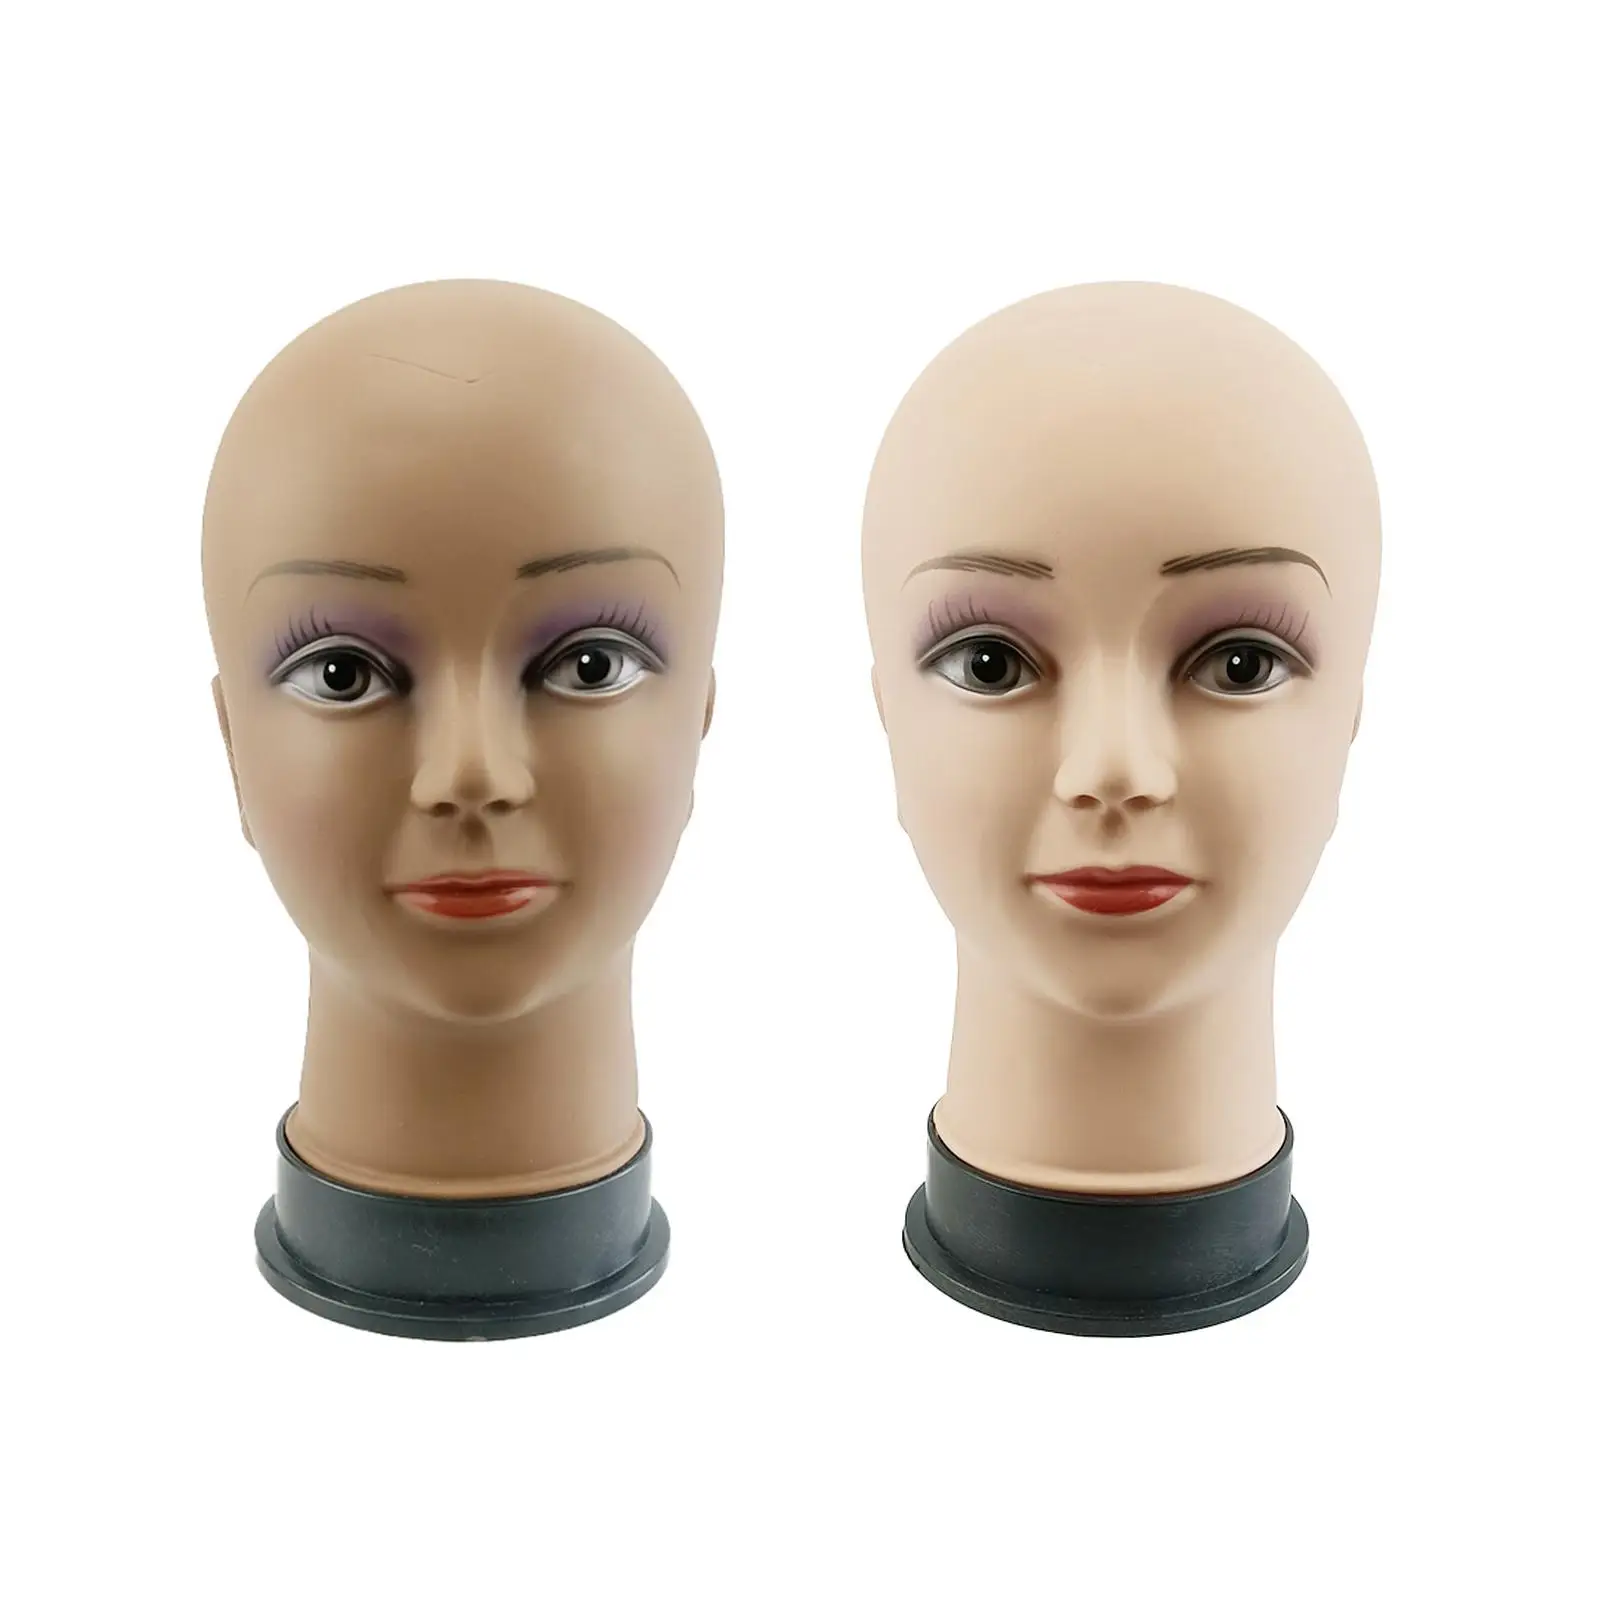 Female Mannequin Head Bald Cosmetology Professional for Making Wigs Glasses Hat Display Training Massage Practice